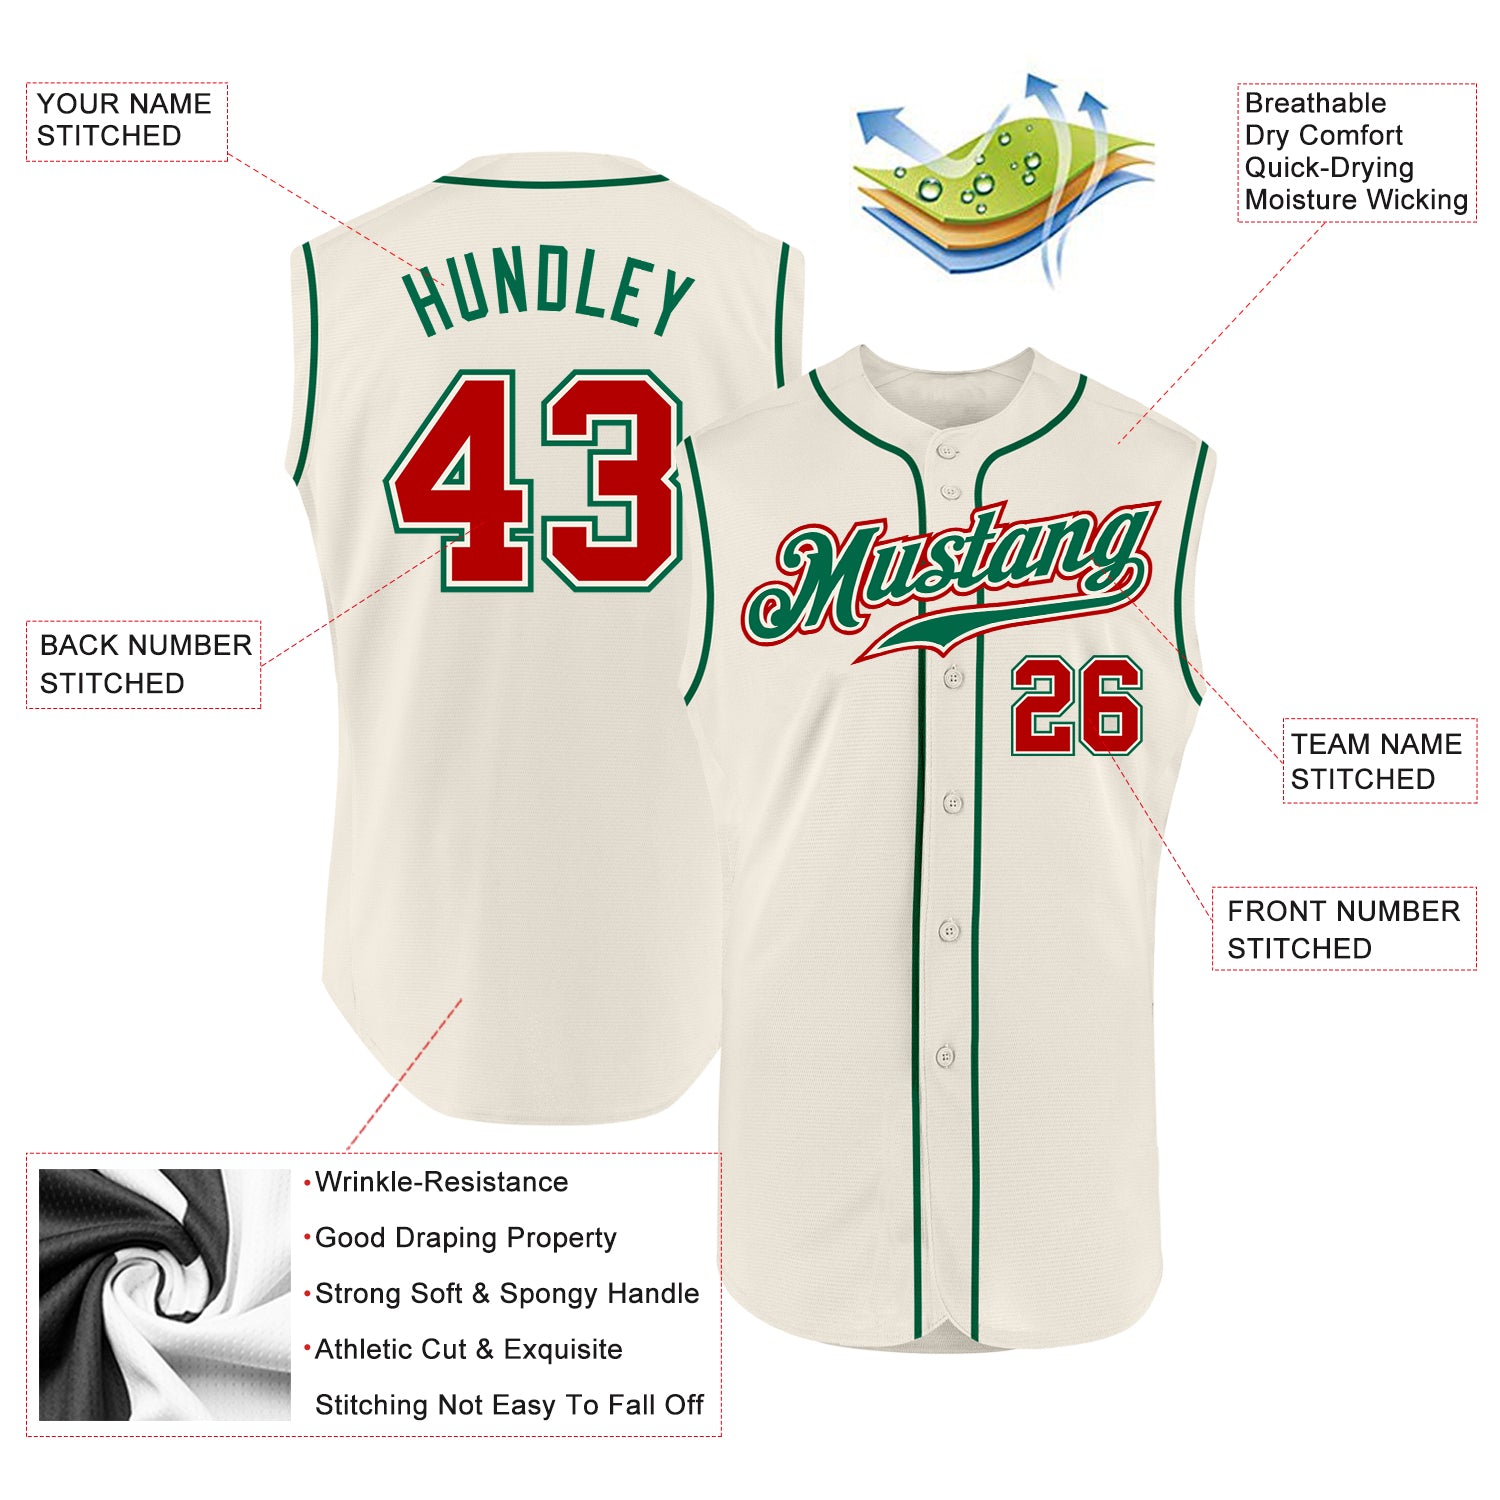 Custom Black Red Kelly Green 3D Mexico Authentic Baseball Jersey